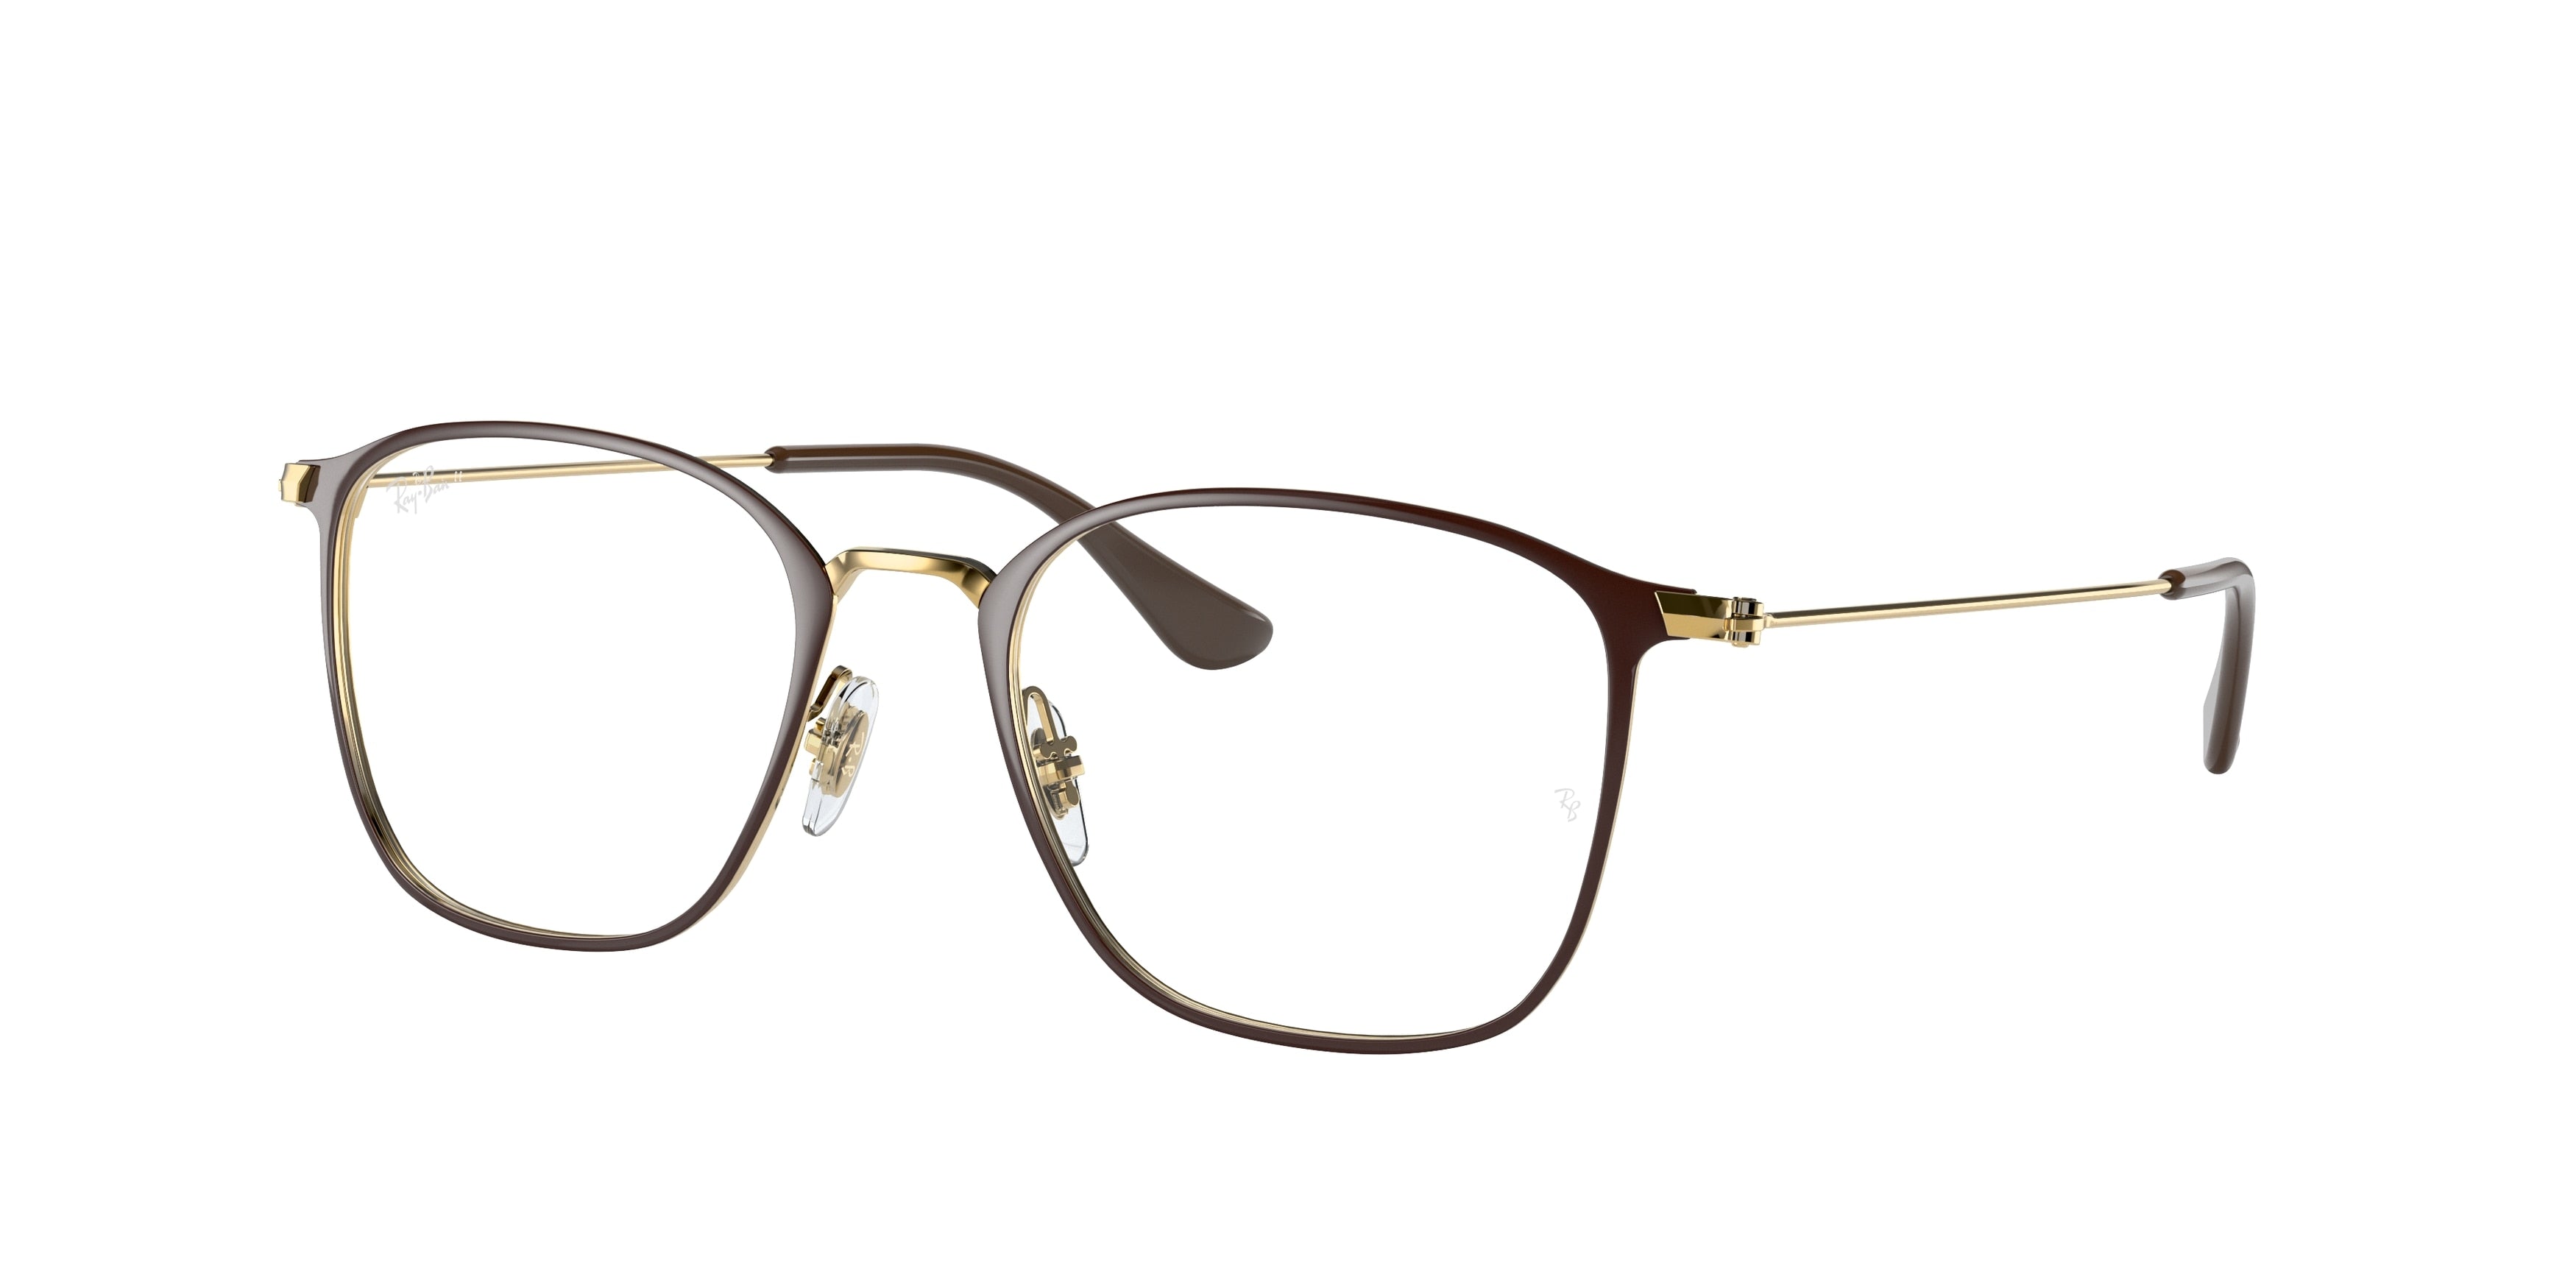 Ray-Ban Optical RX6466 Square Eyeglasses  2905-Brown On Gold 51-145-19 - Color Map Brown